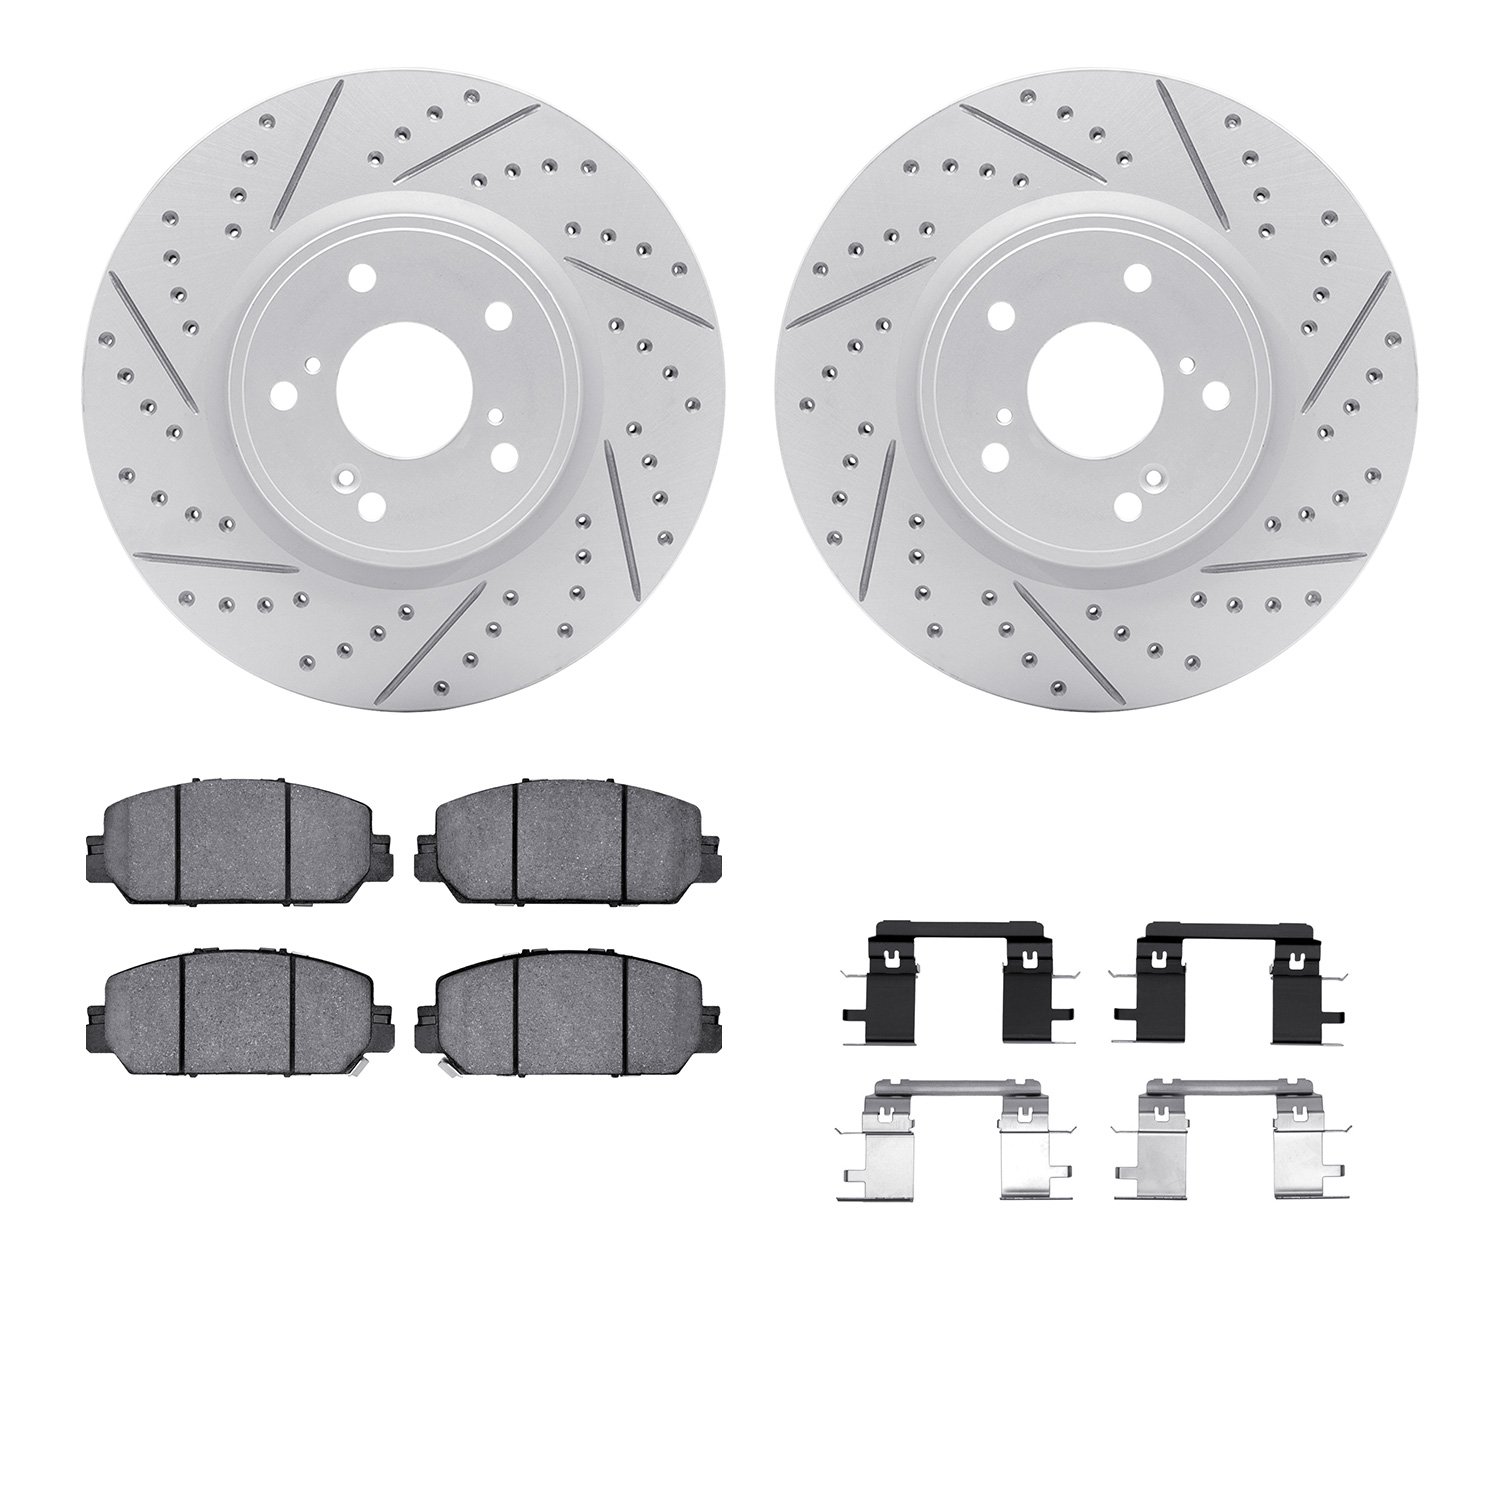 2512-59095 Geoperformance Drilled/Slotted Rotors w/5000 Advanced Brake Pads Kit & Hardware, Fits Select Acura/Honda, Position: F